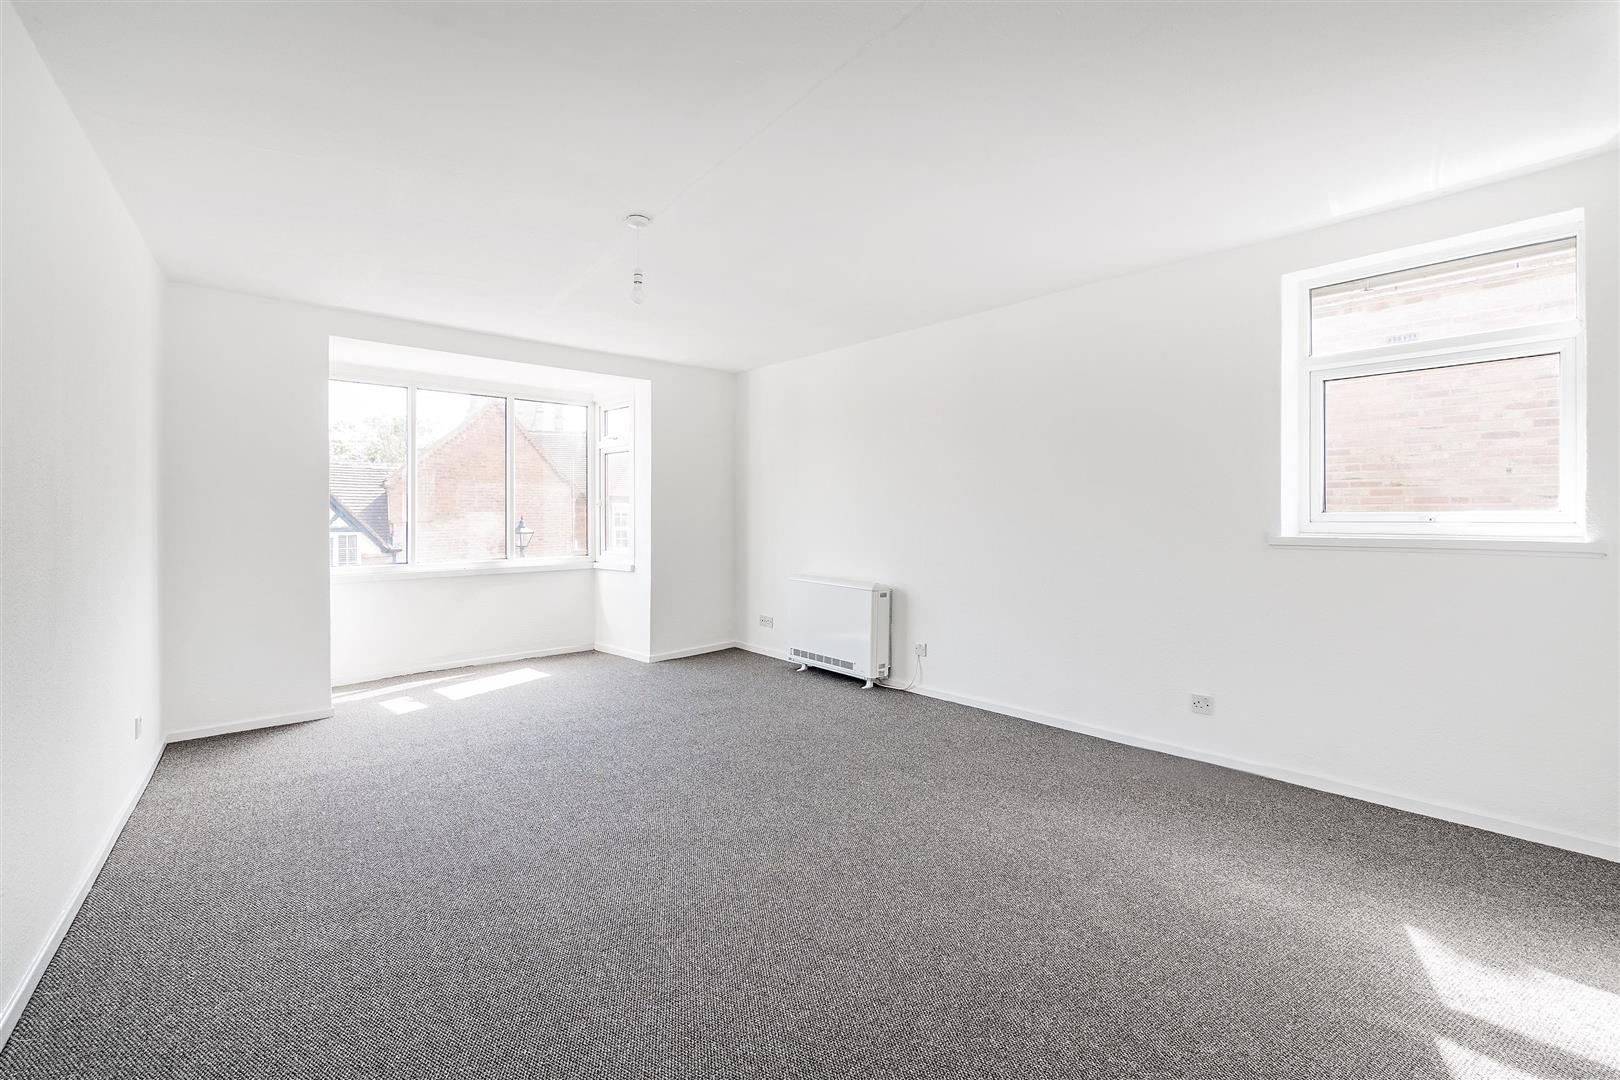 2 bed  to rent in High Street, Solihull, B93 